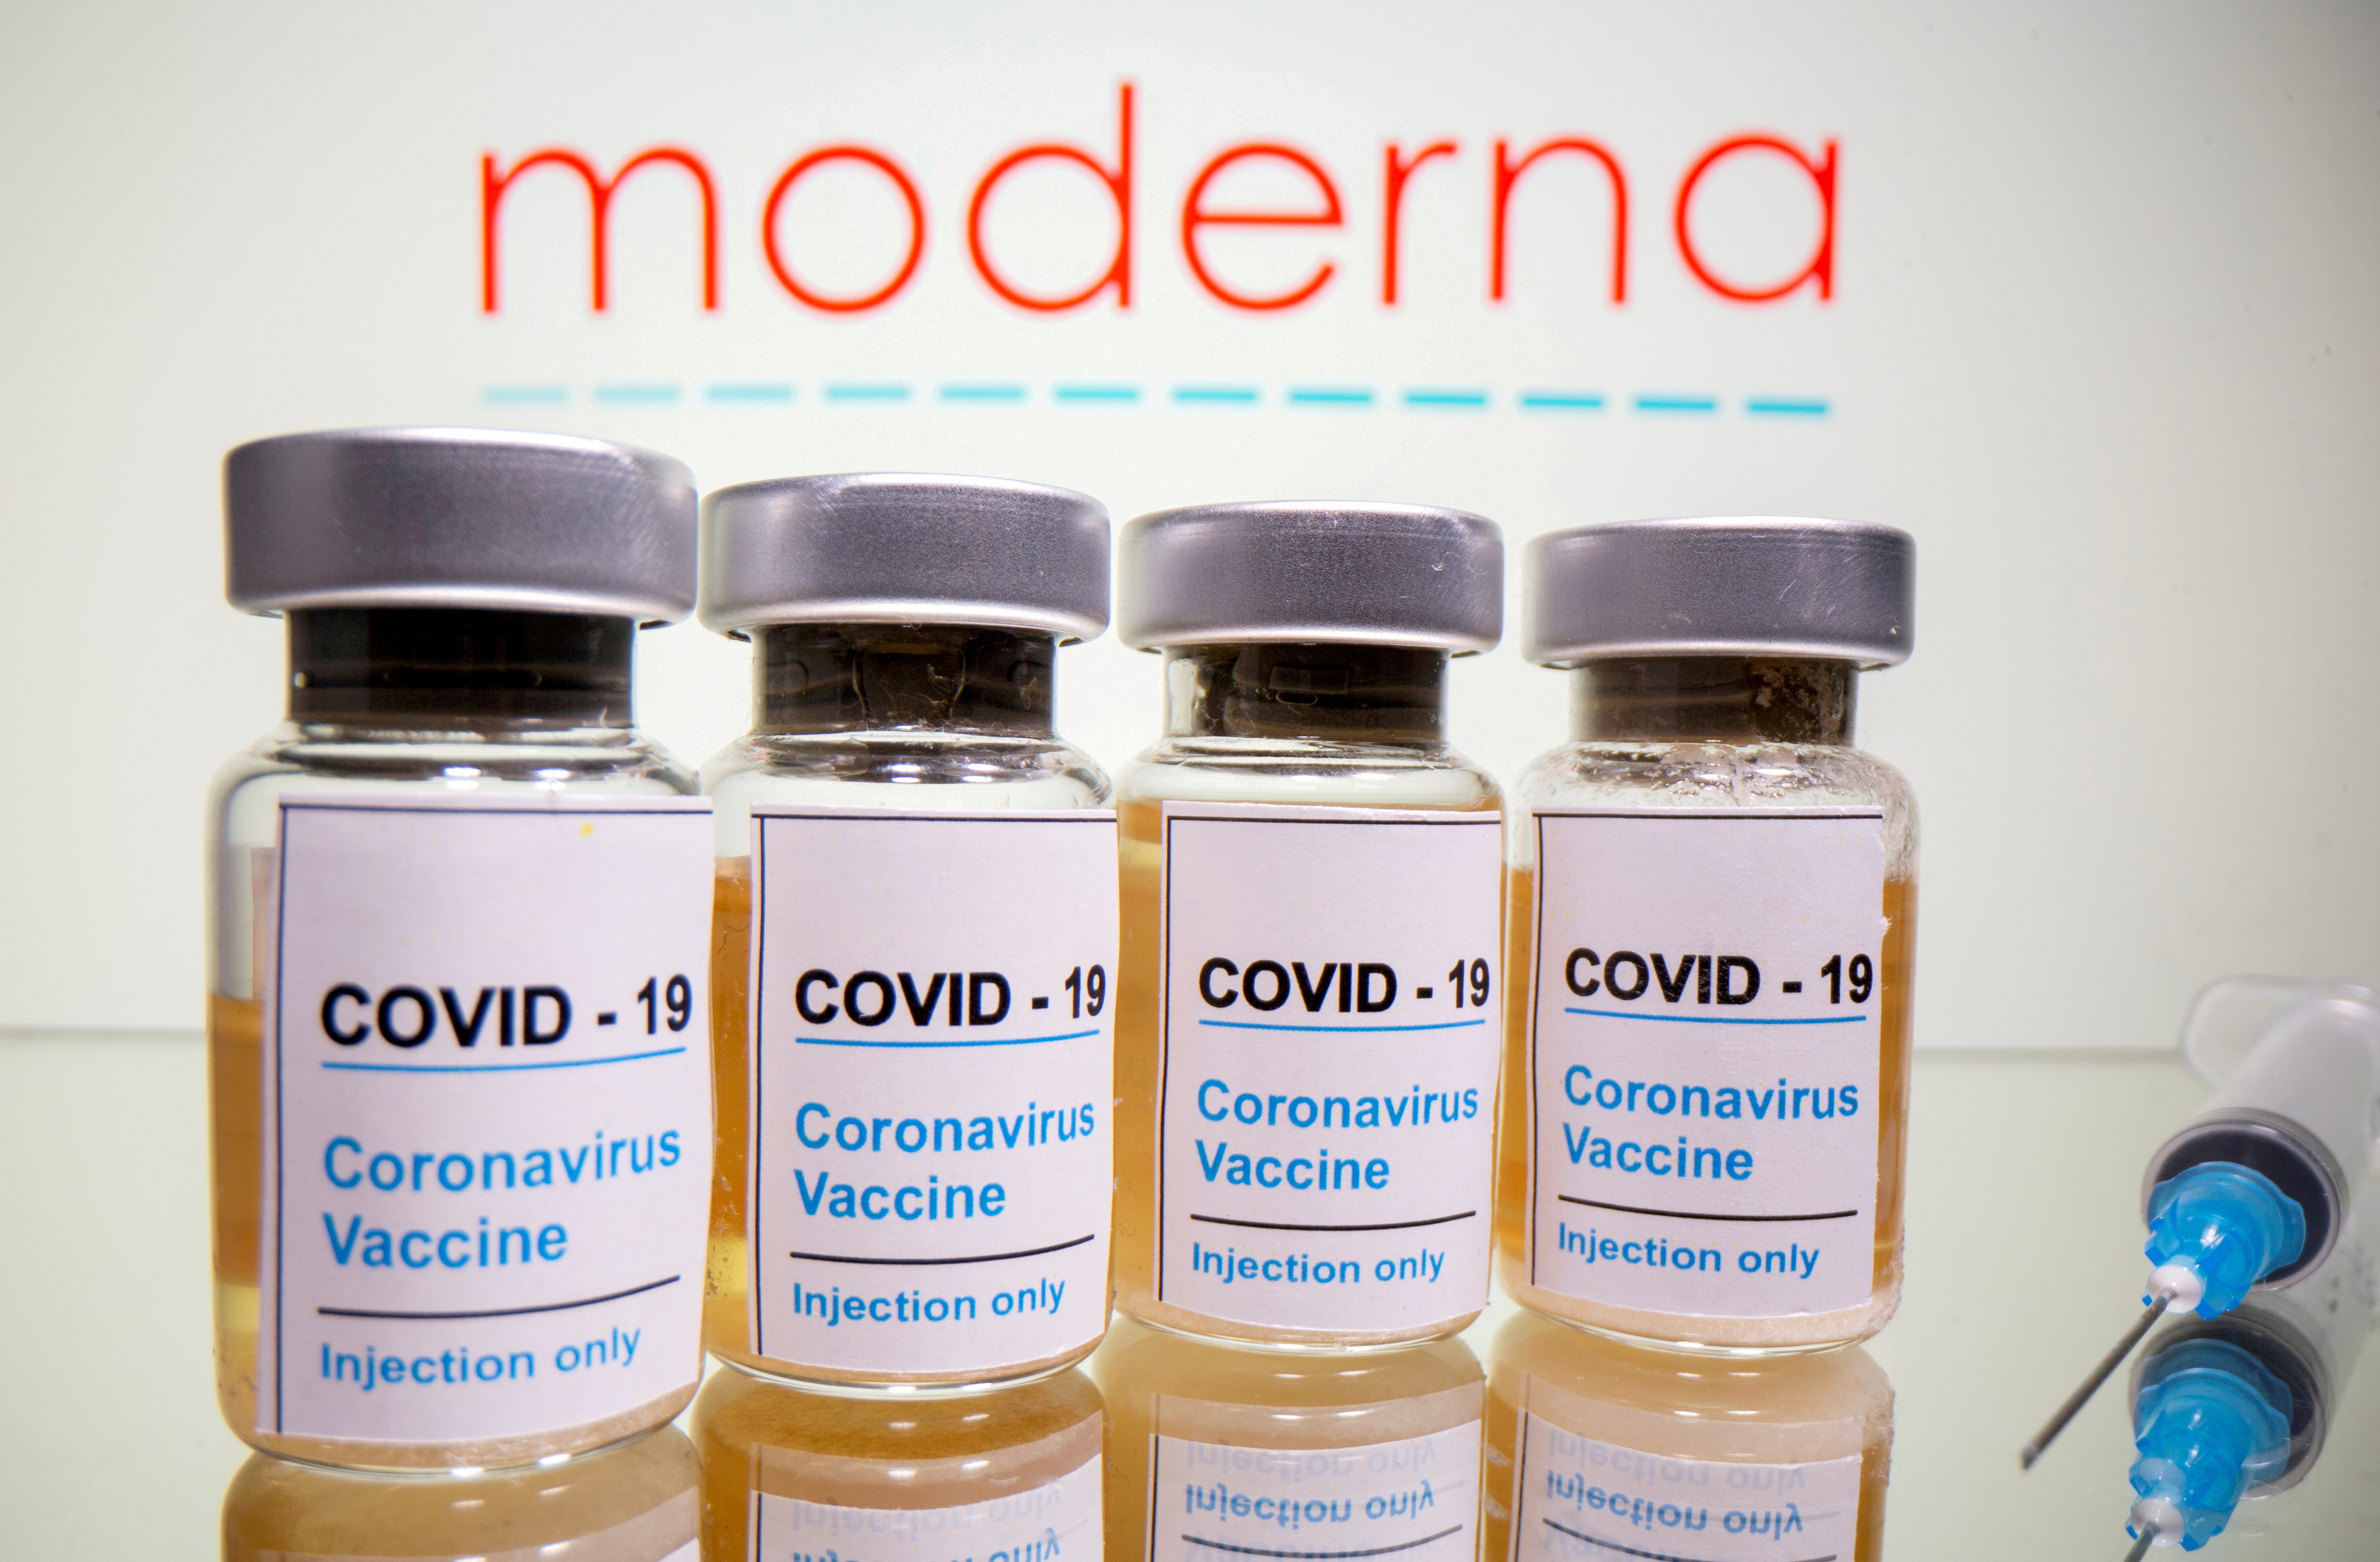 What strength is the Moderna vaccine?